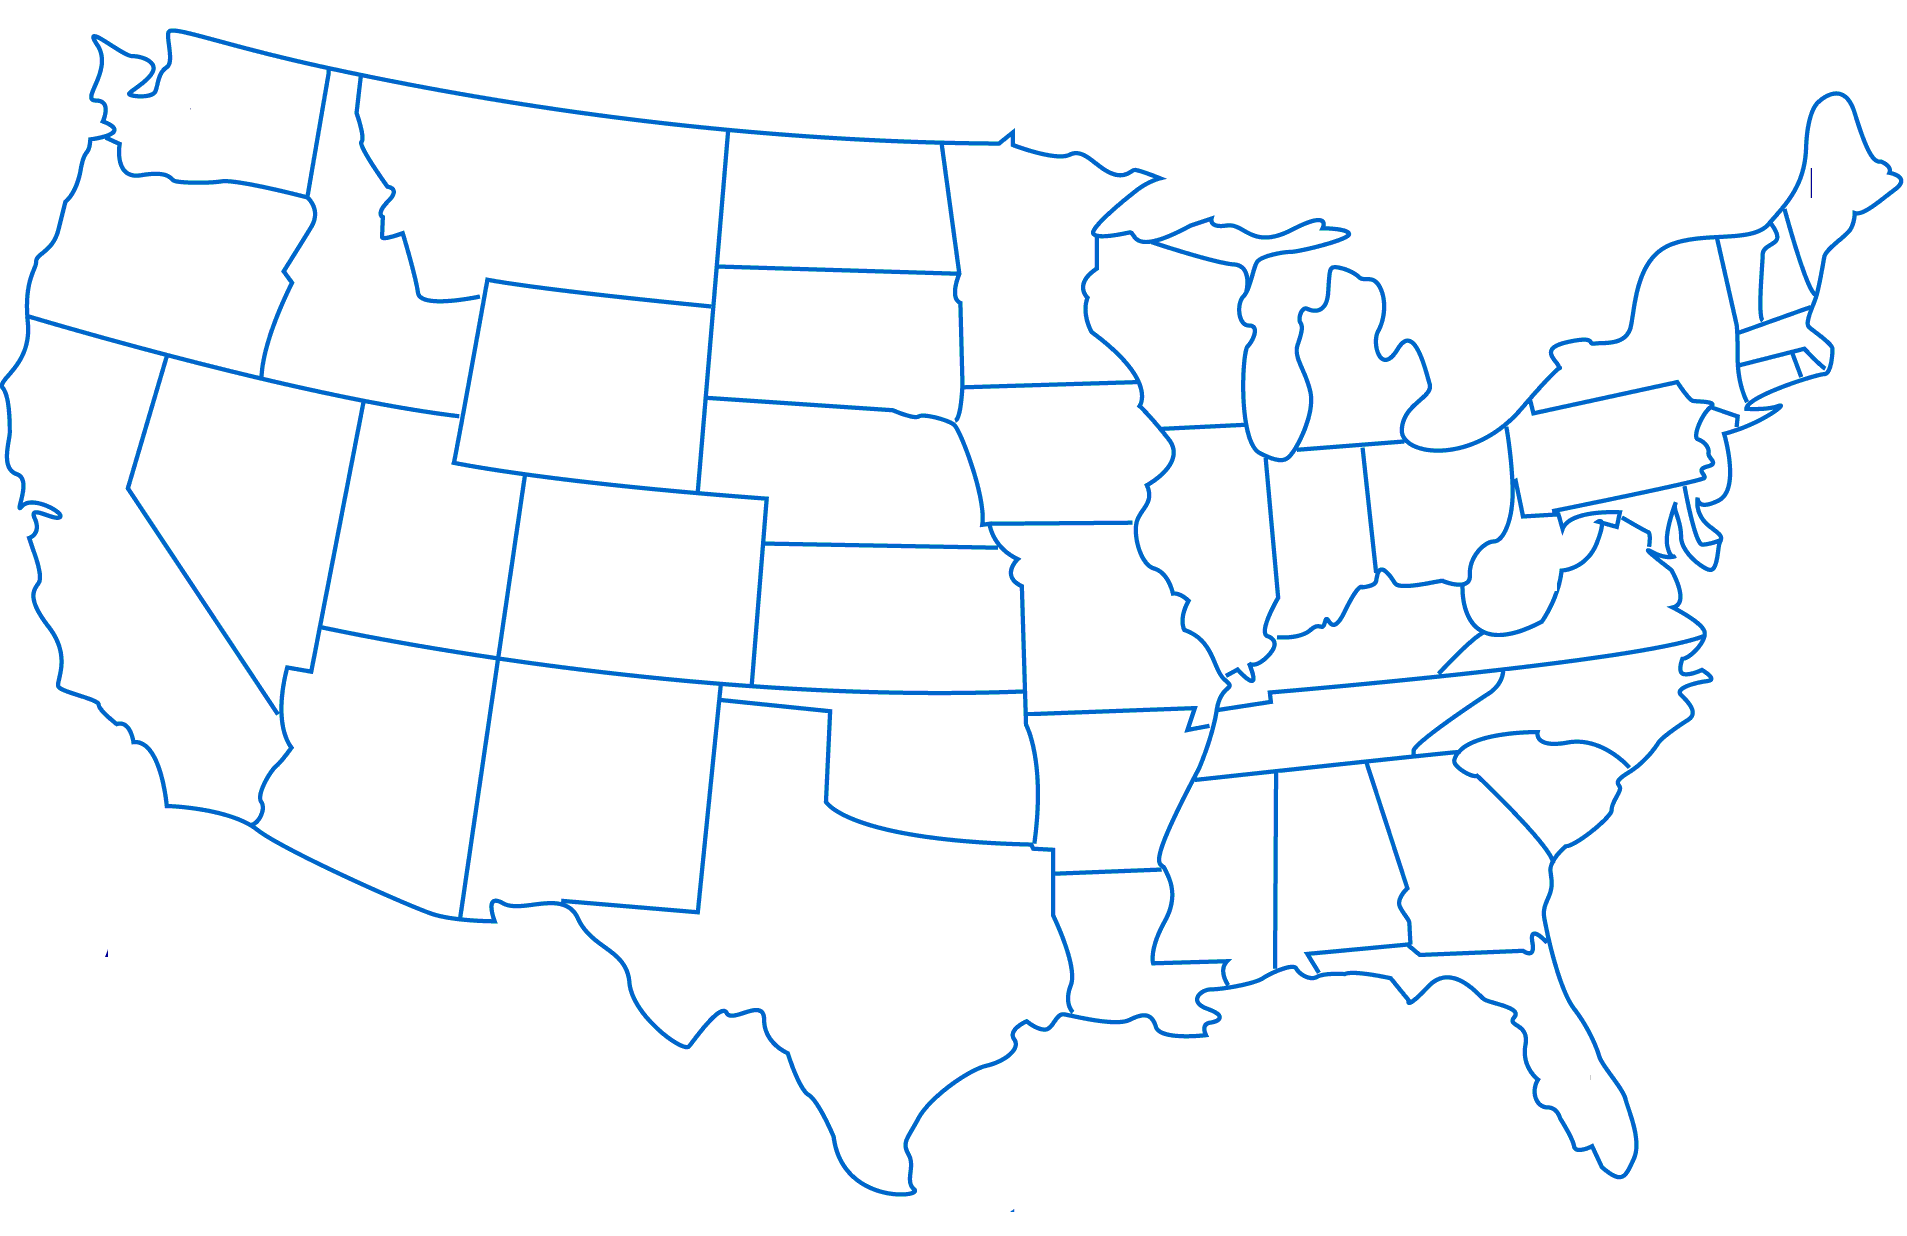 Blank States Map - Dr. Odd